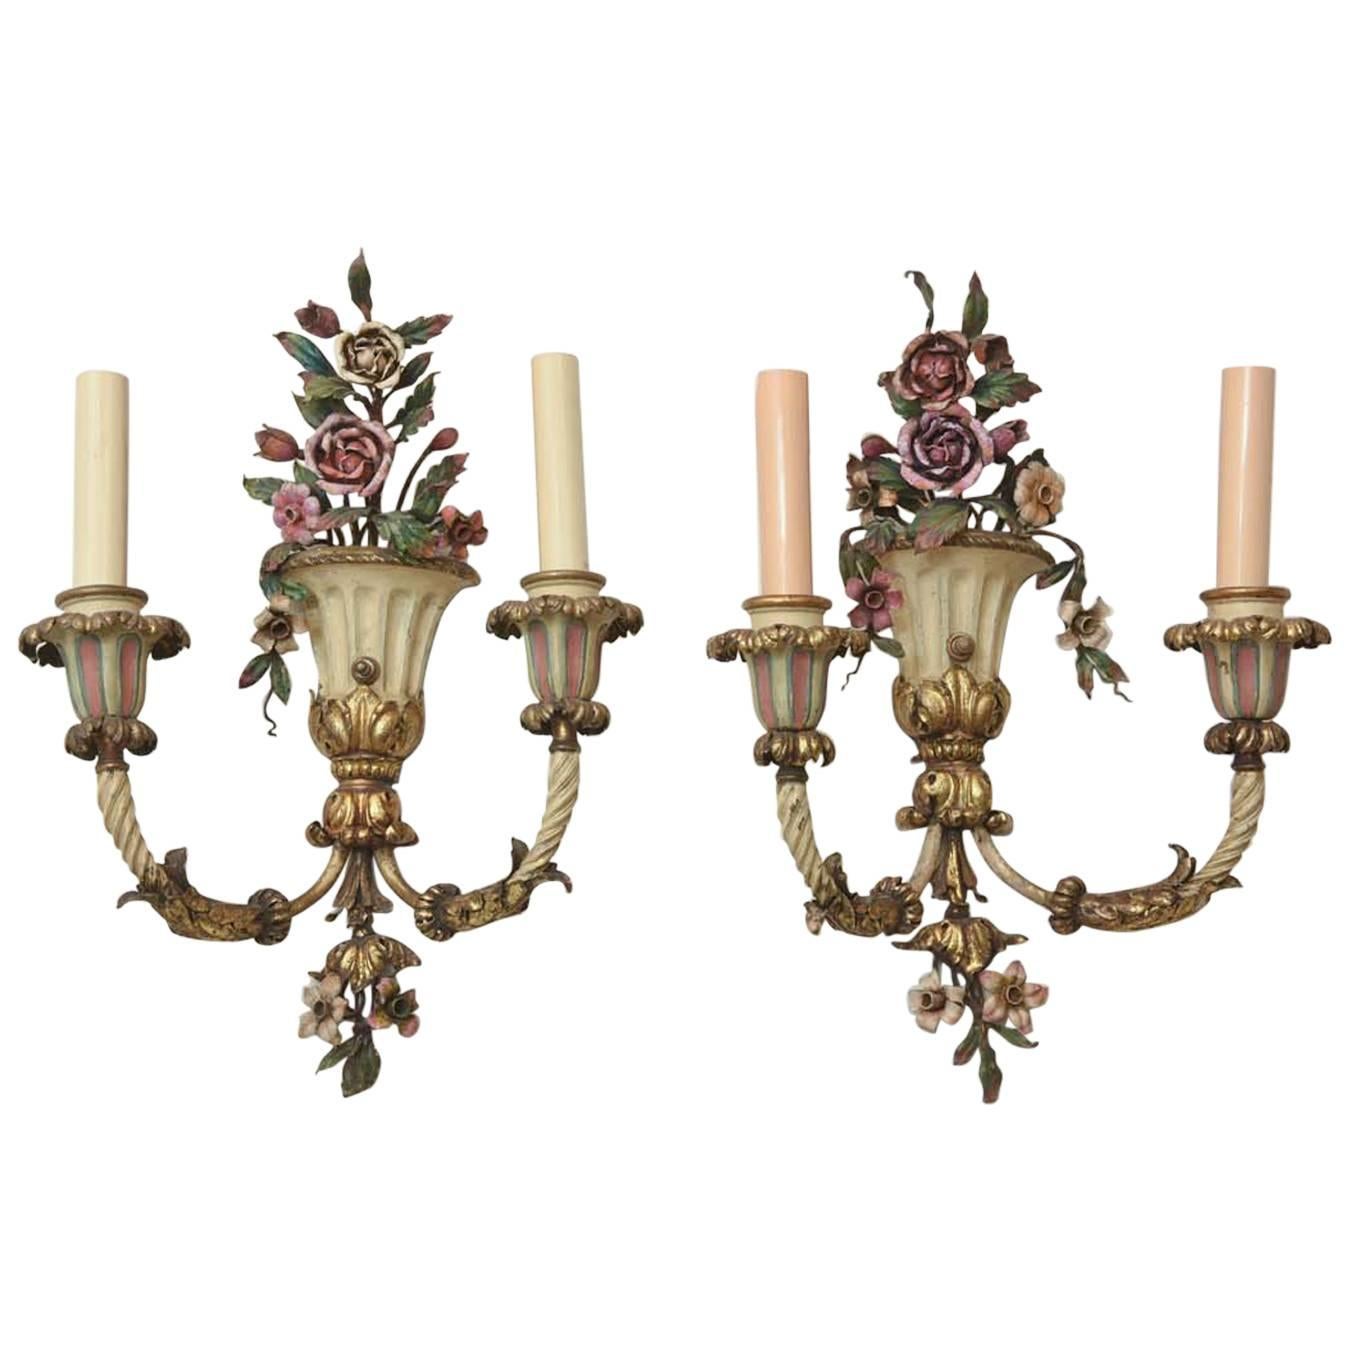 Pair of Finely-Made Floral Urn Form Wall Sconces, Early 20th Century For Sale